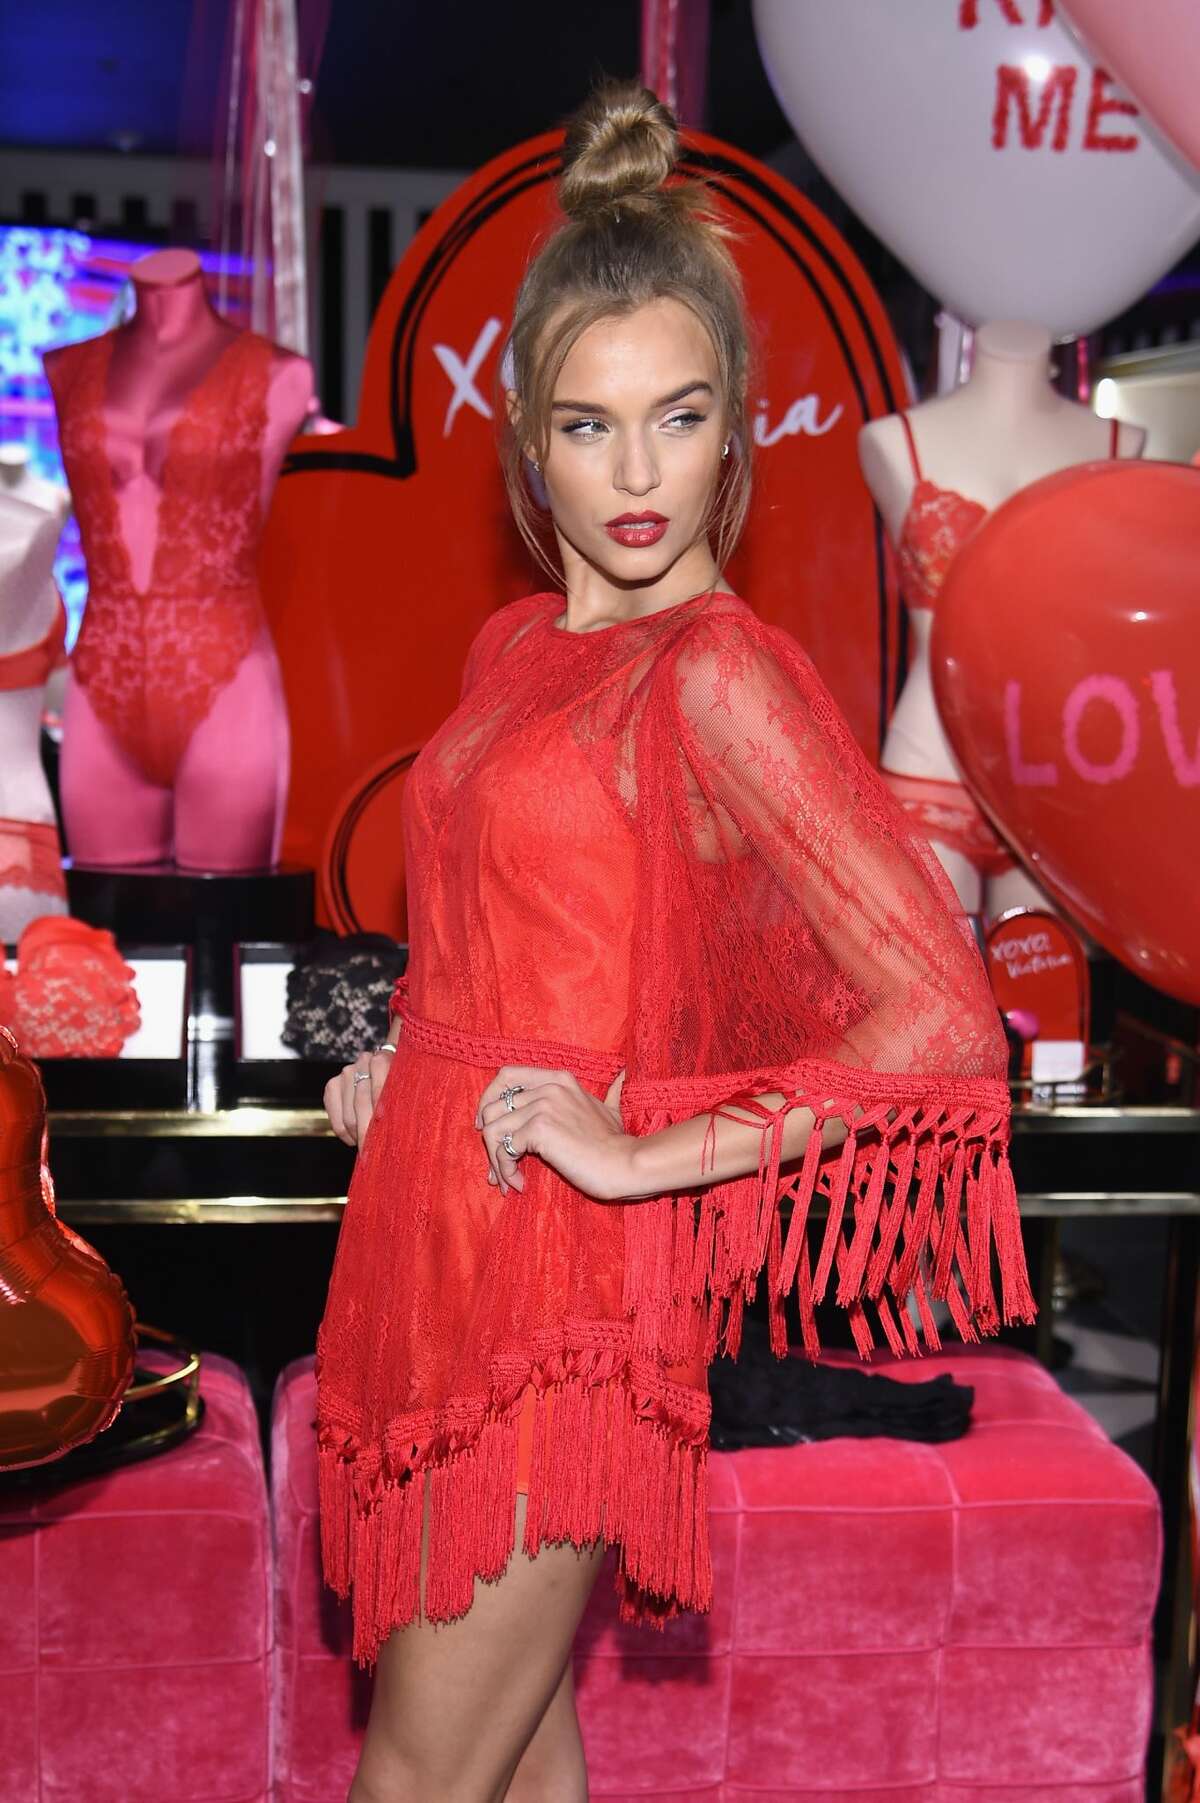 Let the Victoria's Secret Angels be your gift guide this Valentine's Day